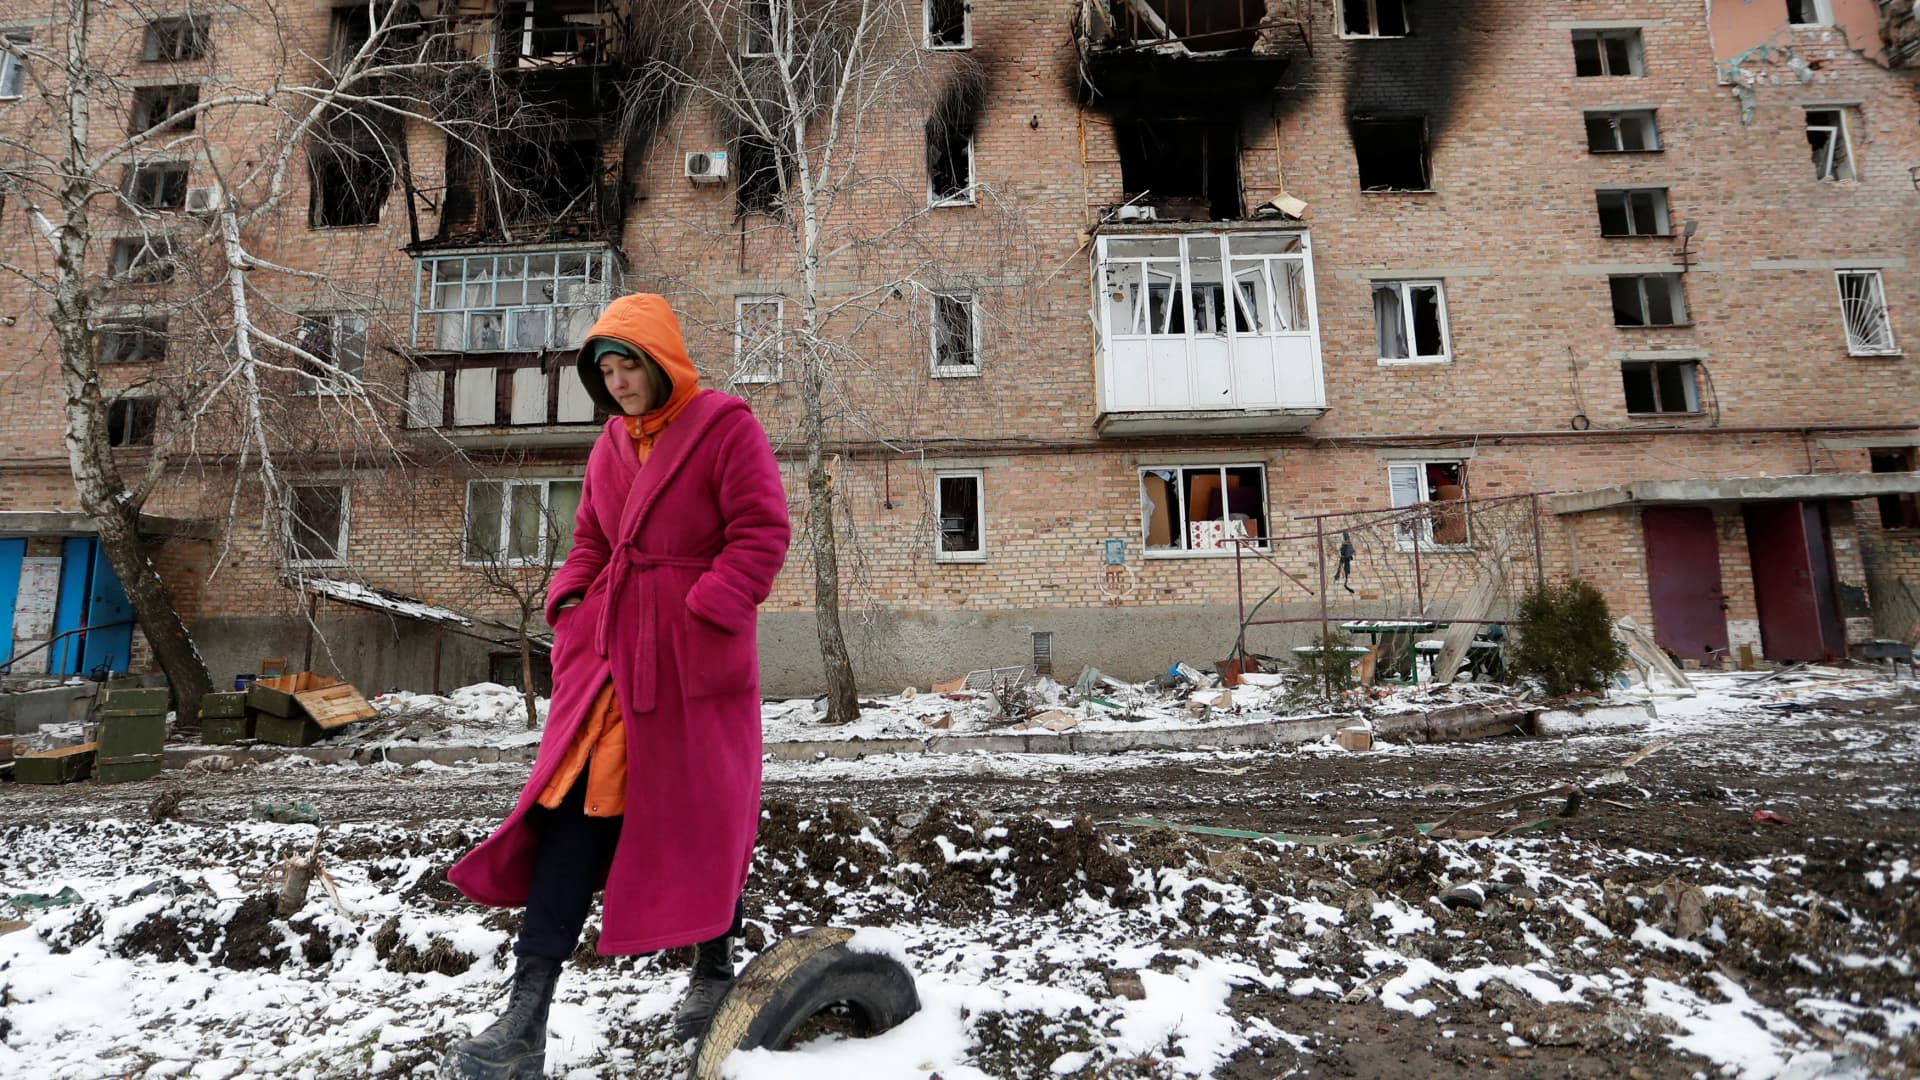 A woman walks in front of a residential building which was damaged during Ukraine-Russia conflict in the separatist-controlled town of Volnovakha in the Donetsk region, Ukraine March 11, 2022.